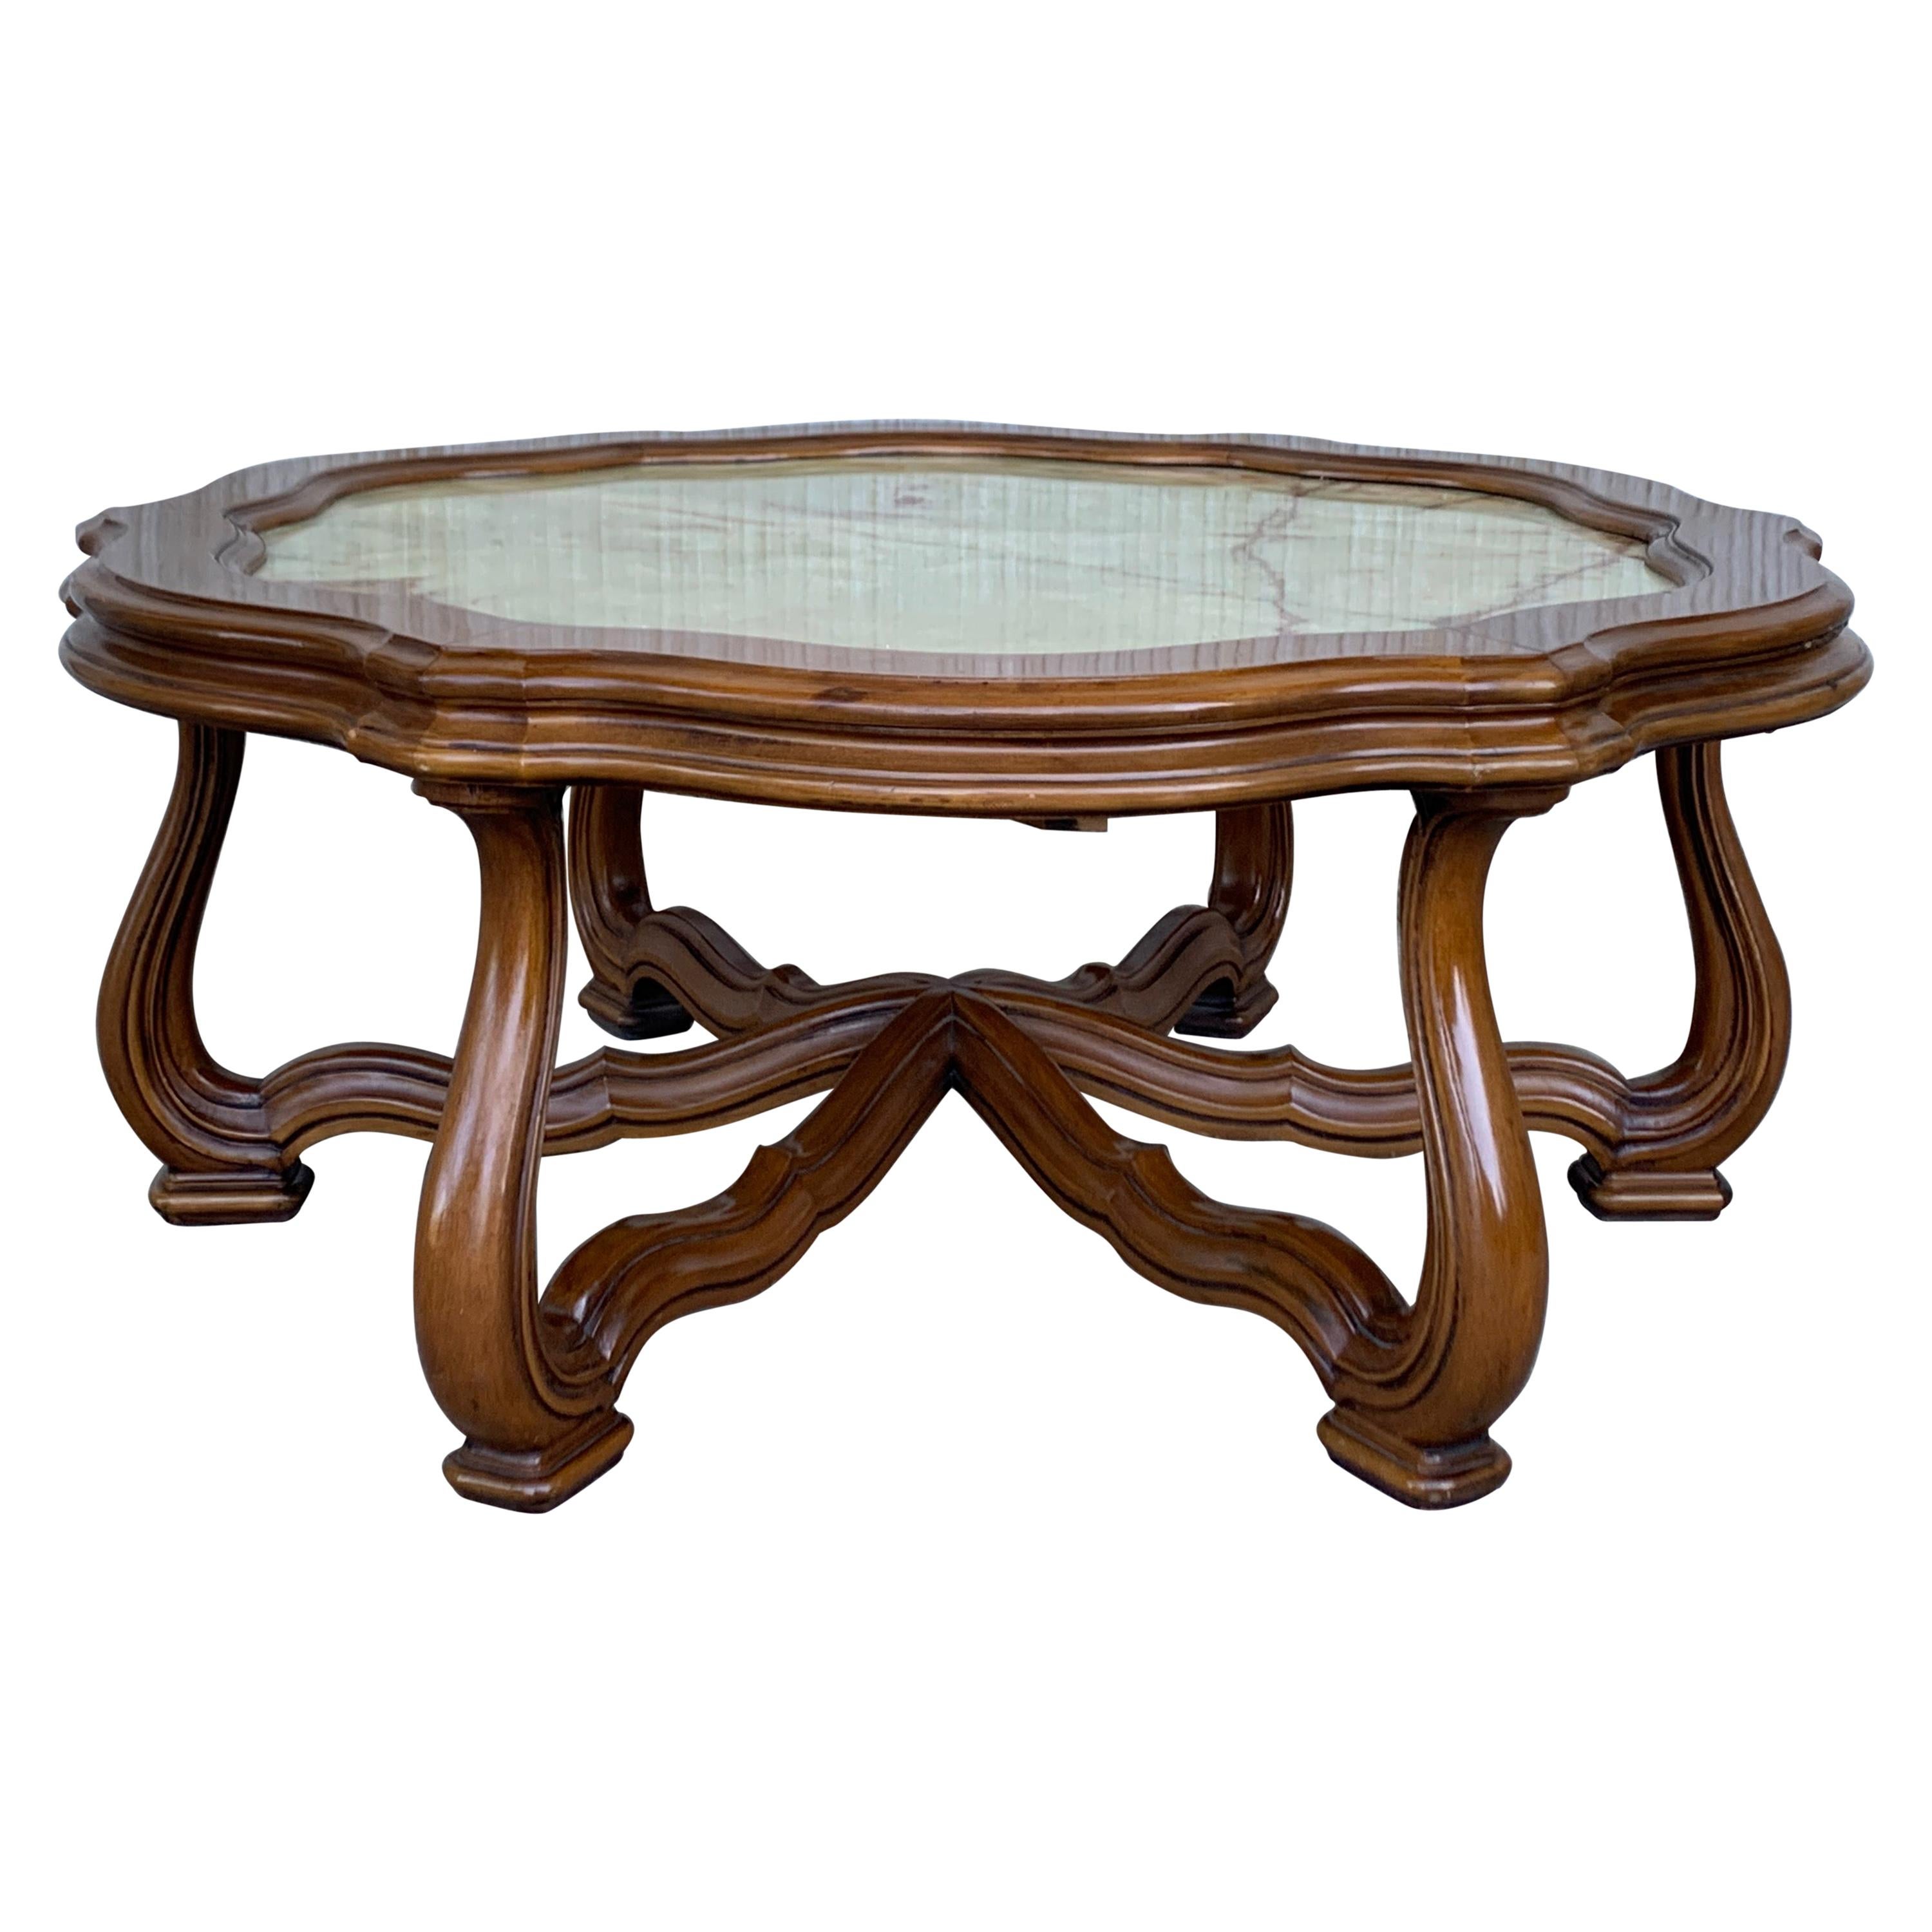 19th Green Onyx Fleur Form Top with Oak Legs Coffee Table For Sale